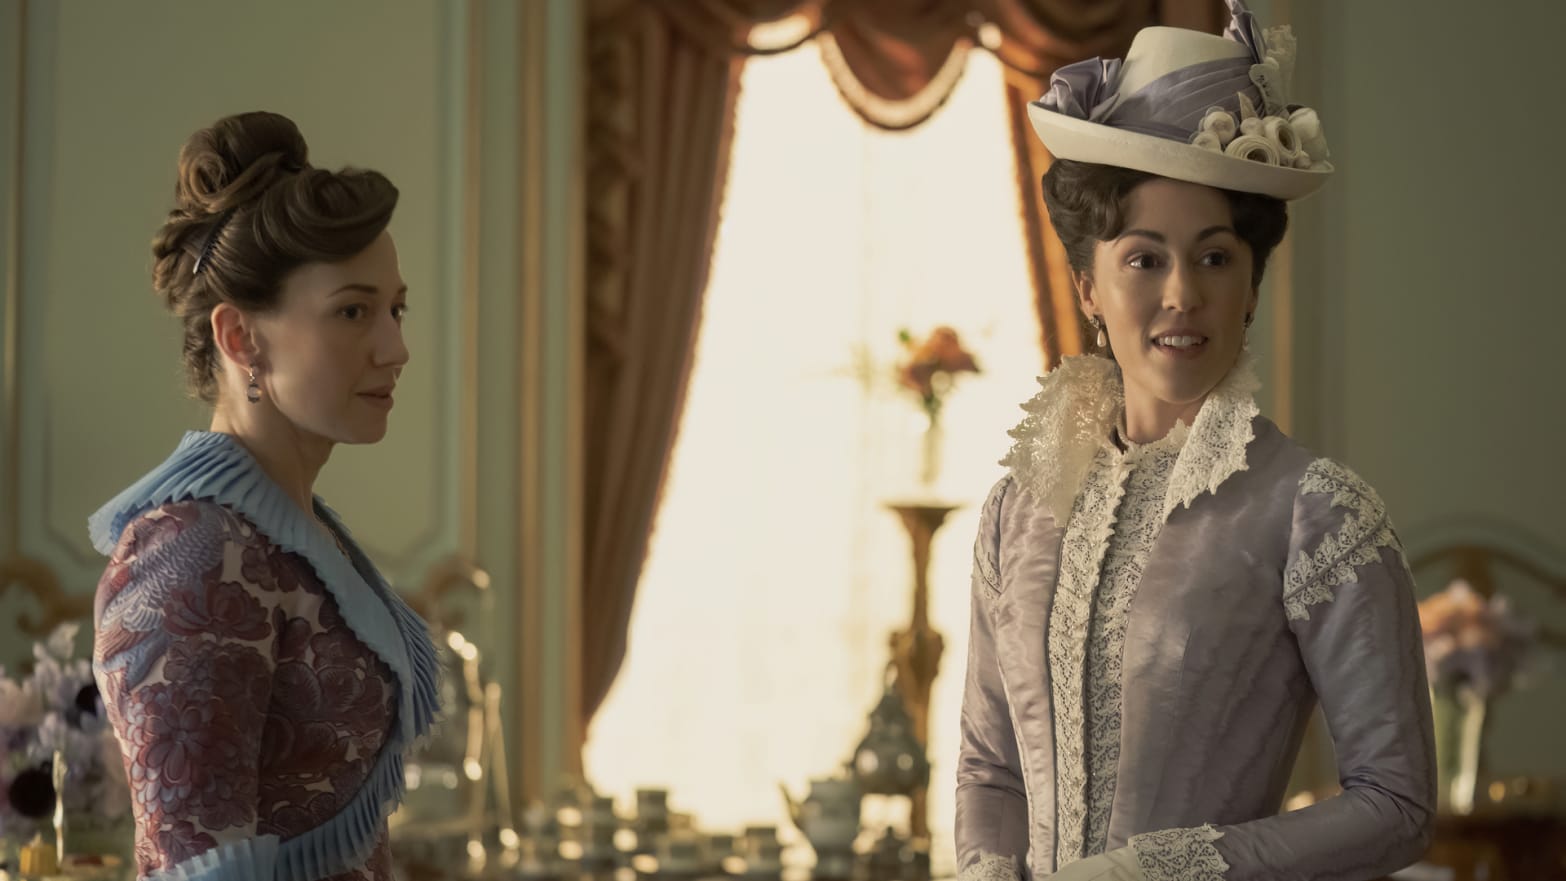 Photo still of Kelley Curran and Carrie Coon in "The Gilded Age"